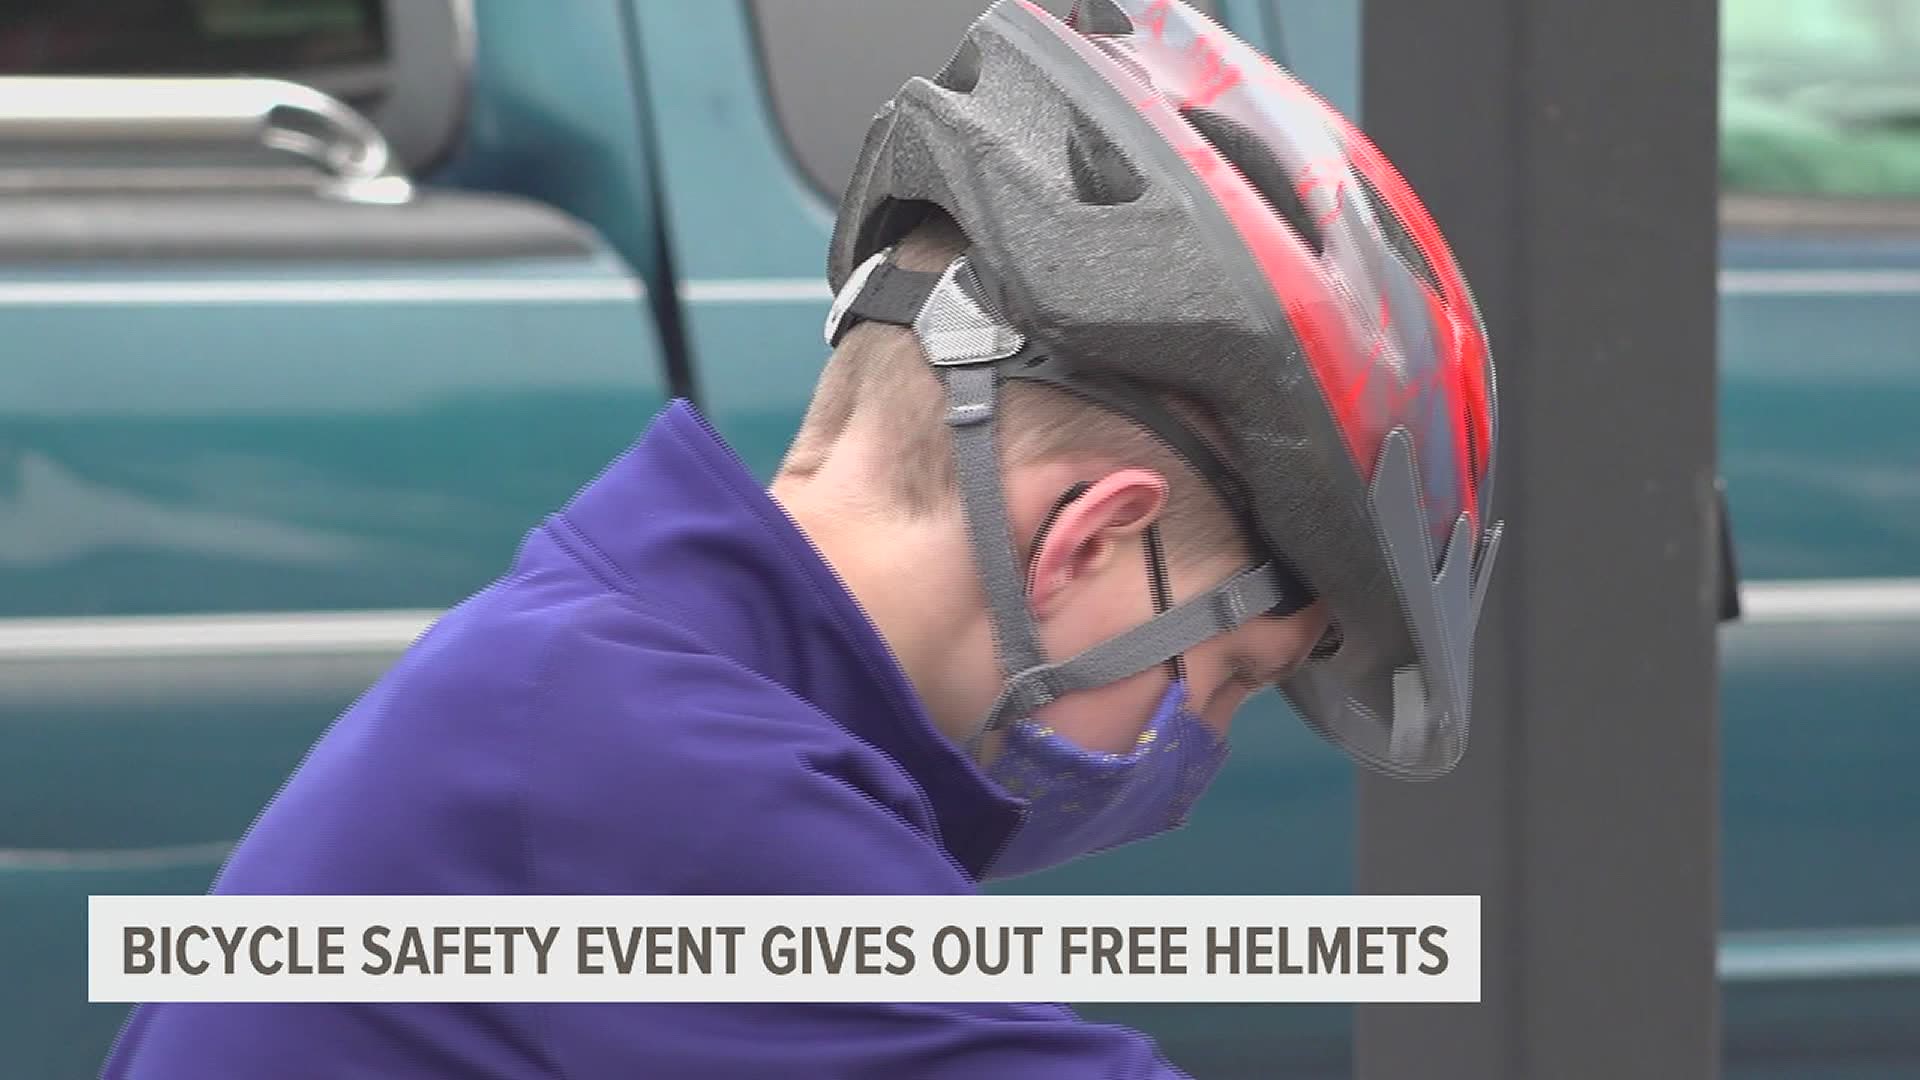 Almost 200 free helmets were given out a the event